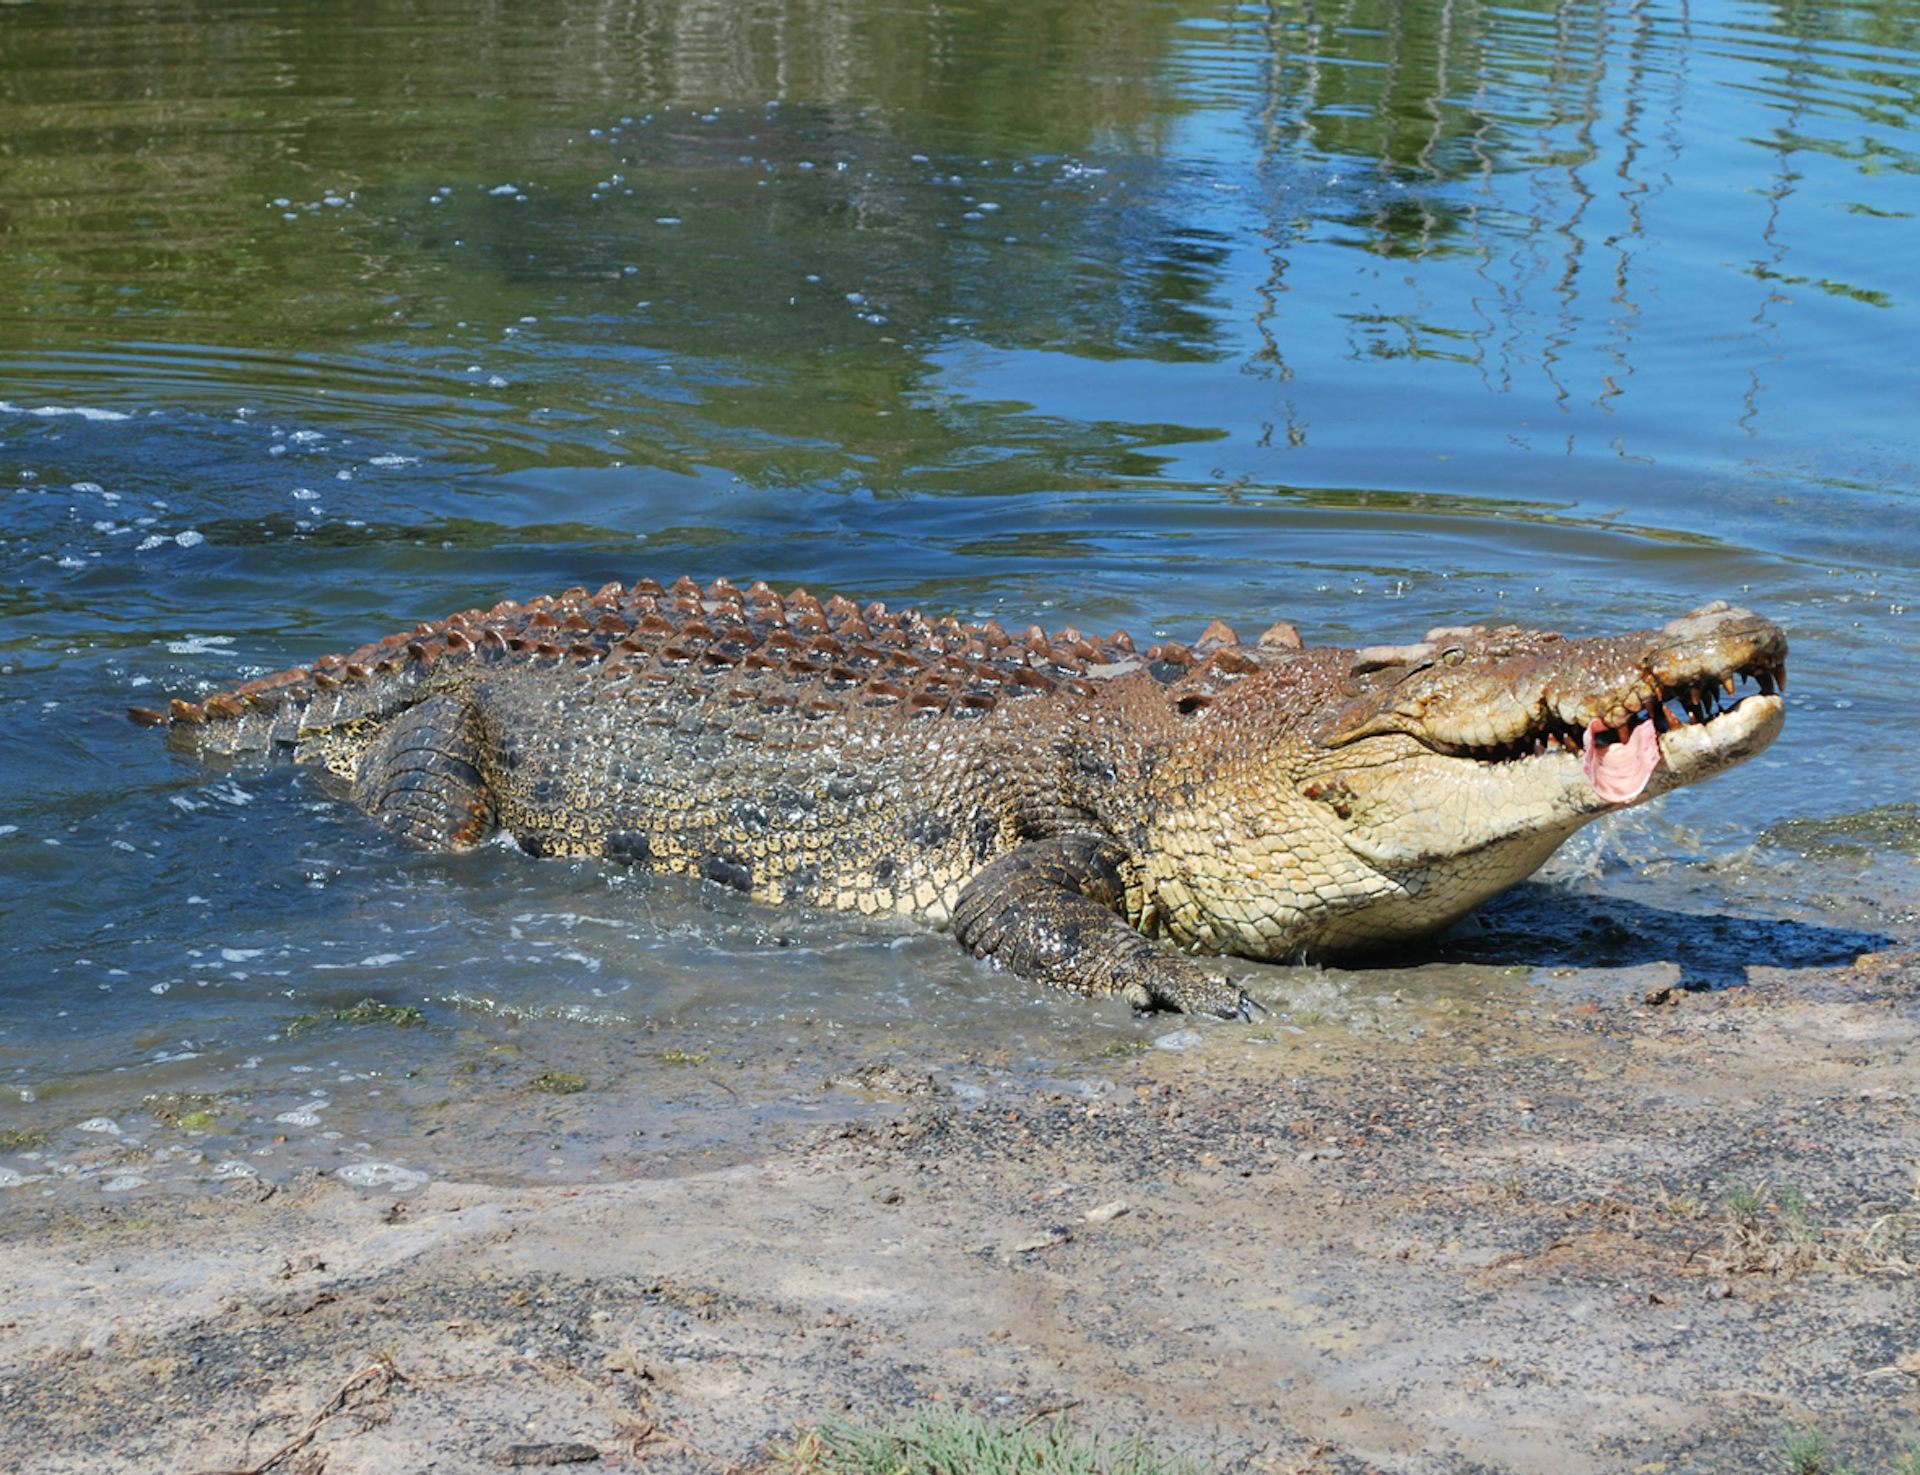 croc research on gambling habits gets 